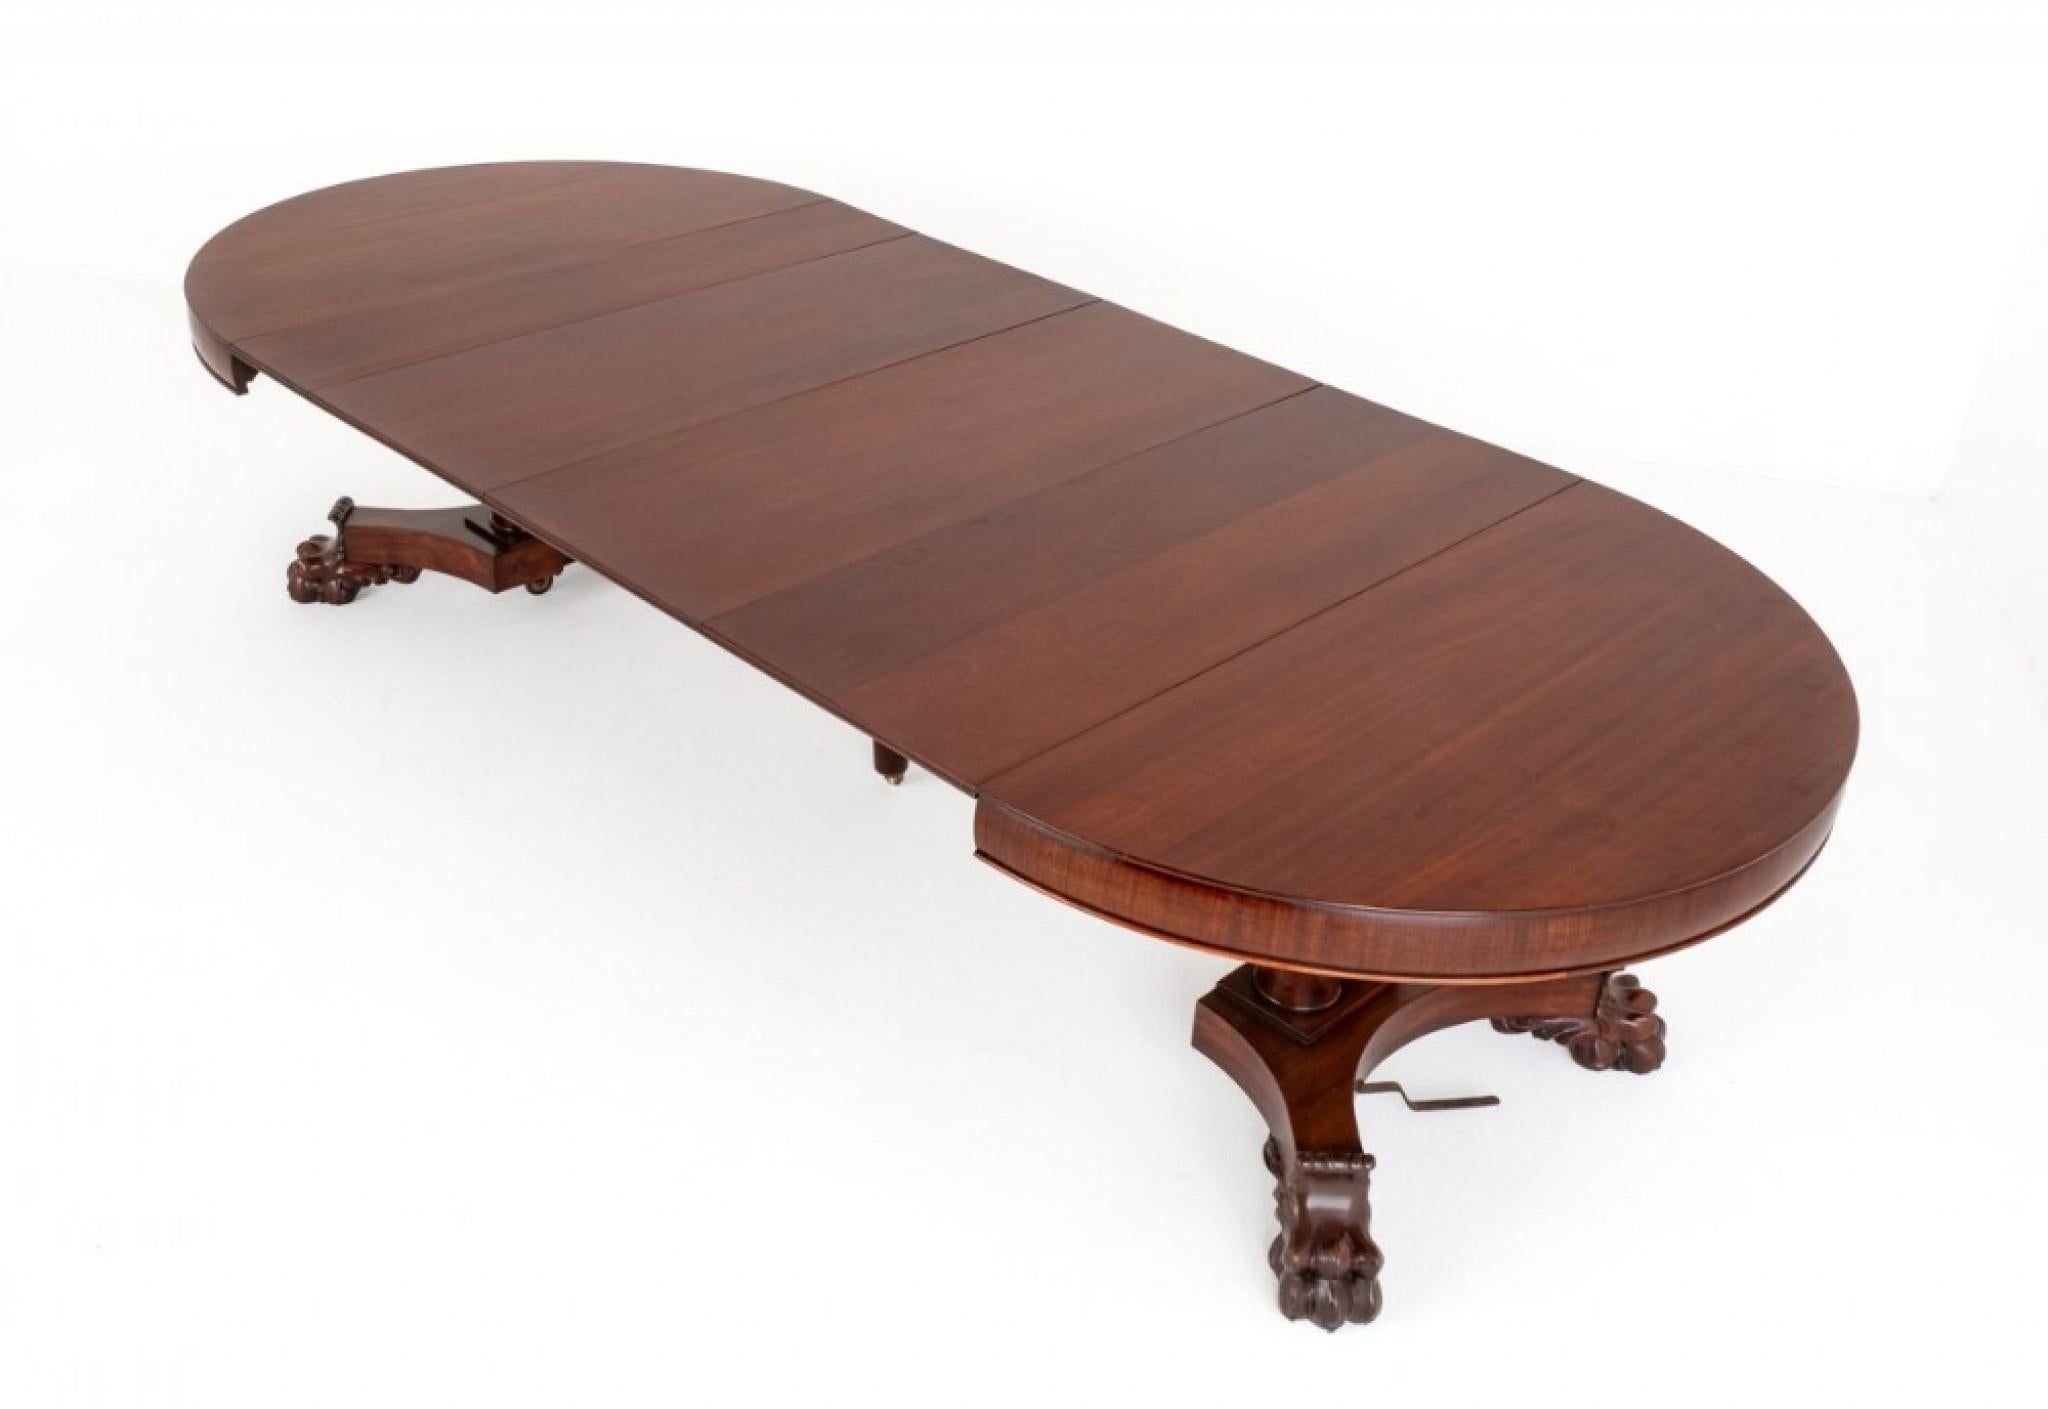 French Mahogany Extending Dining Table.
This Impressive Dining Table is Raised Upon a Platform Base with Boldly Carved Lions Paw Feet.
Circa 1880
The Top is Supported By 4 Columns and Features an Apron.
The Table Extends By Way of a Pullout